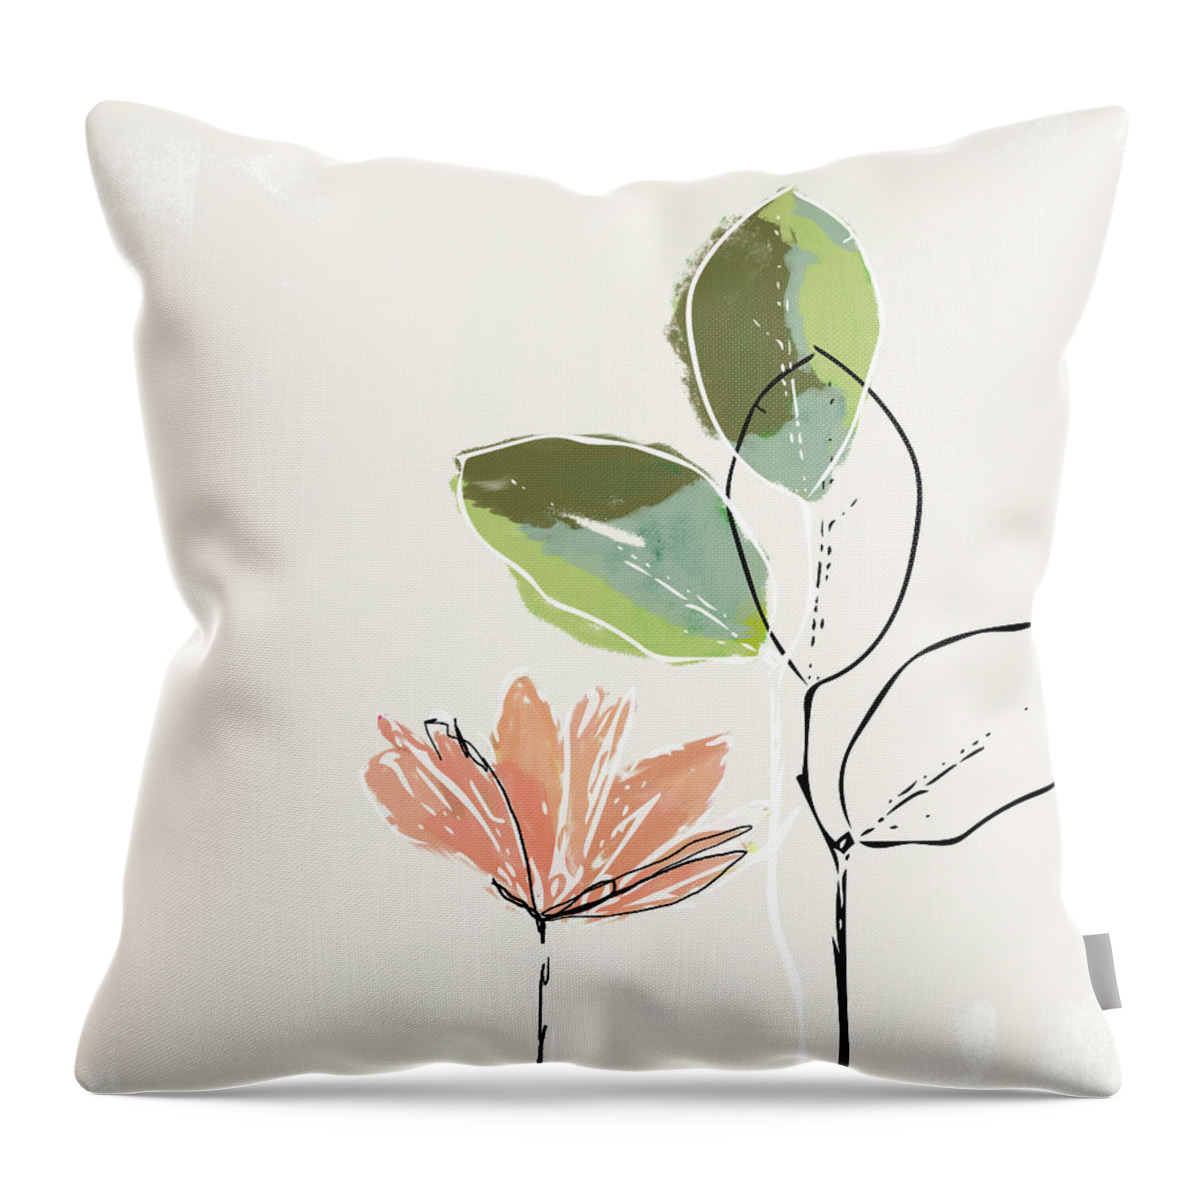 Flower Throw Pillow featuring the mixed media Delicate Flower- Art by Linda Woods by Linda Woods